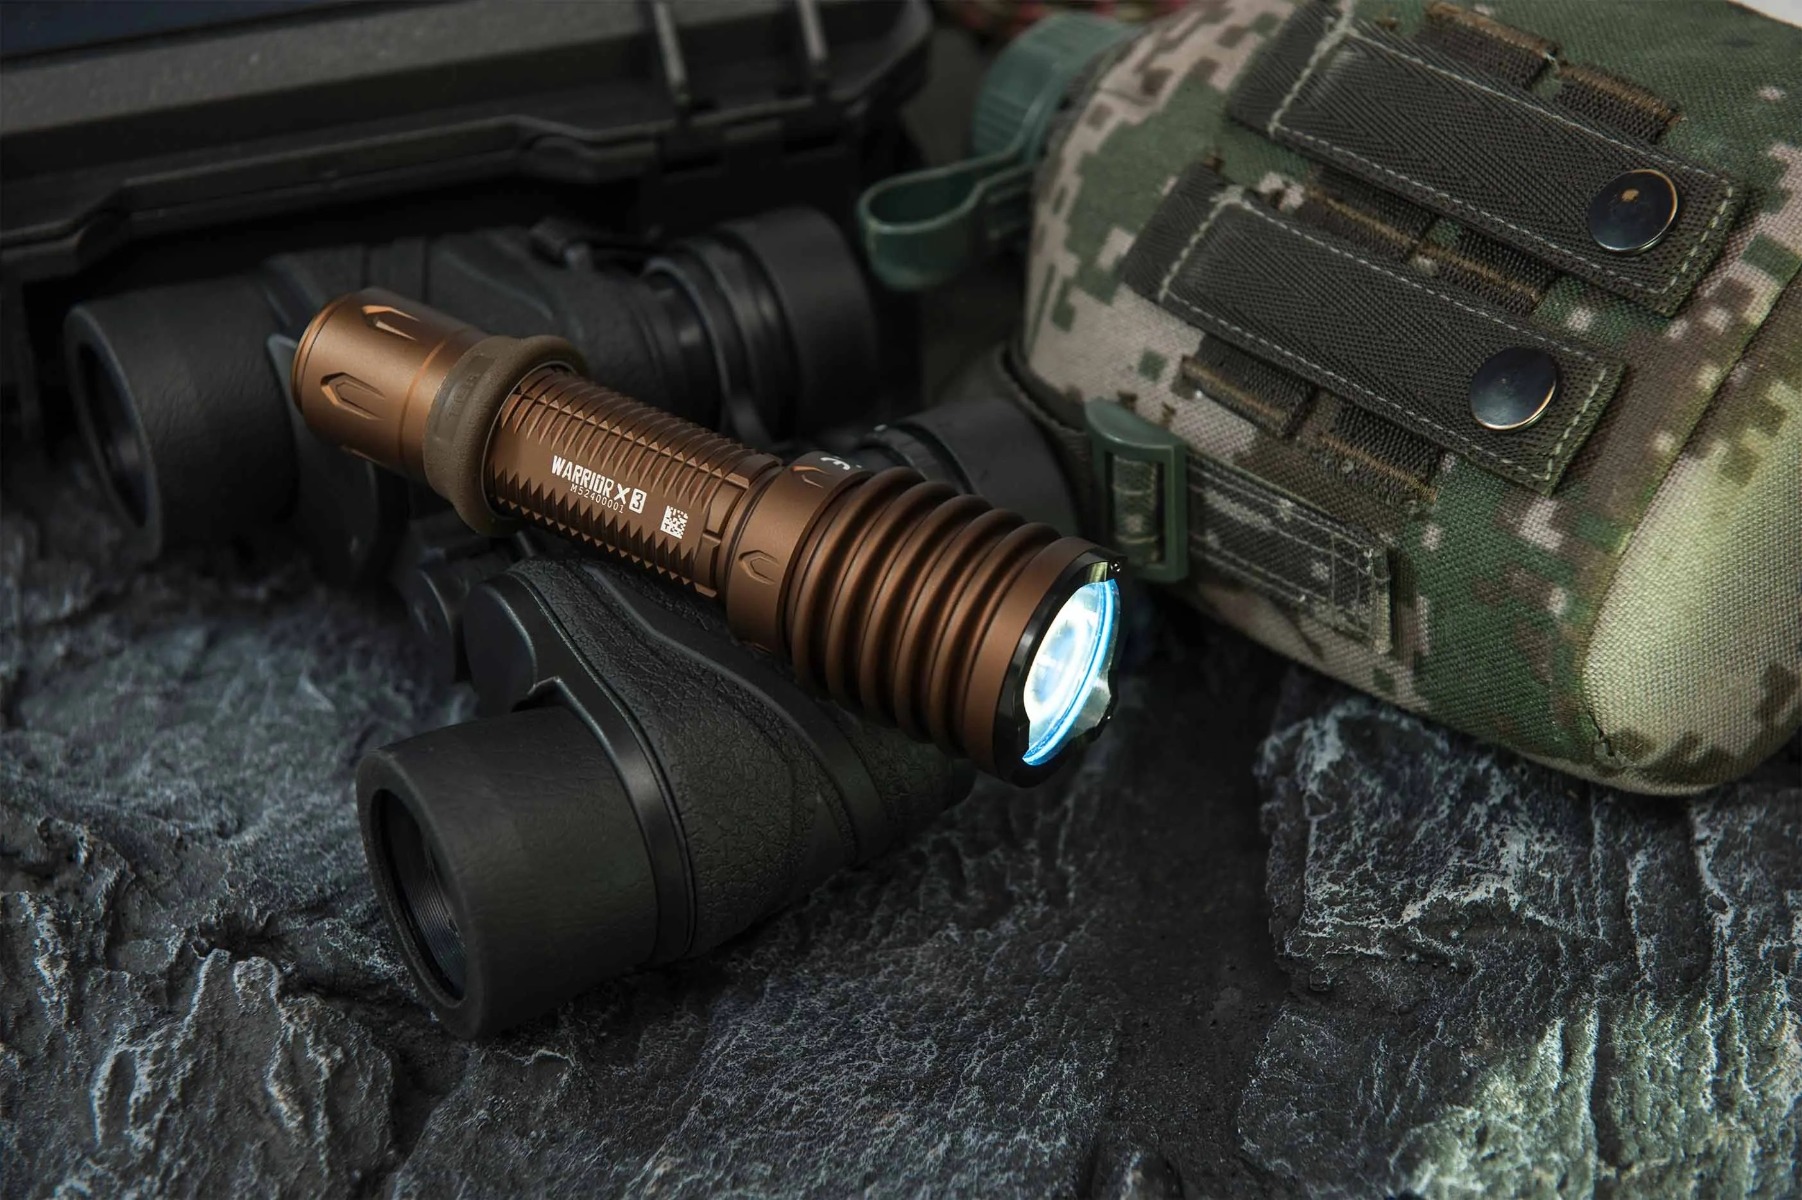 Superior tactical thrower with glass breaker below